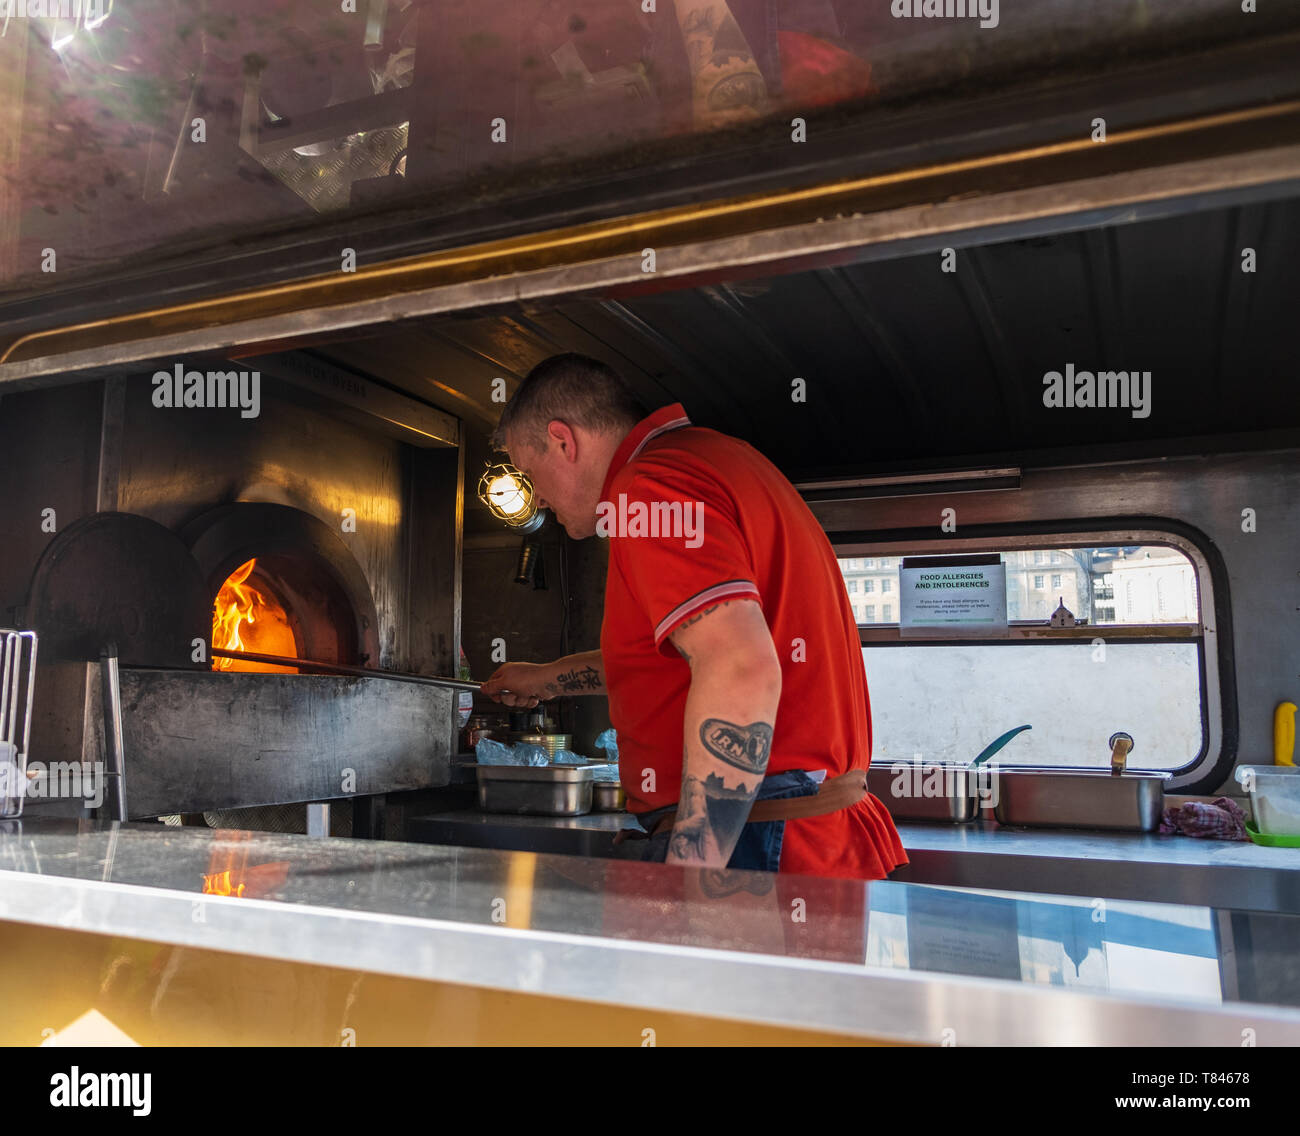 Newcastle, United Kingdom - February 23, 2019: A man bakes pizzas in a rennovated classic van used as a portable canteen serving pizza at Gateshead, N Stock Photo